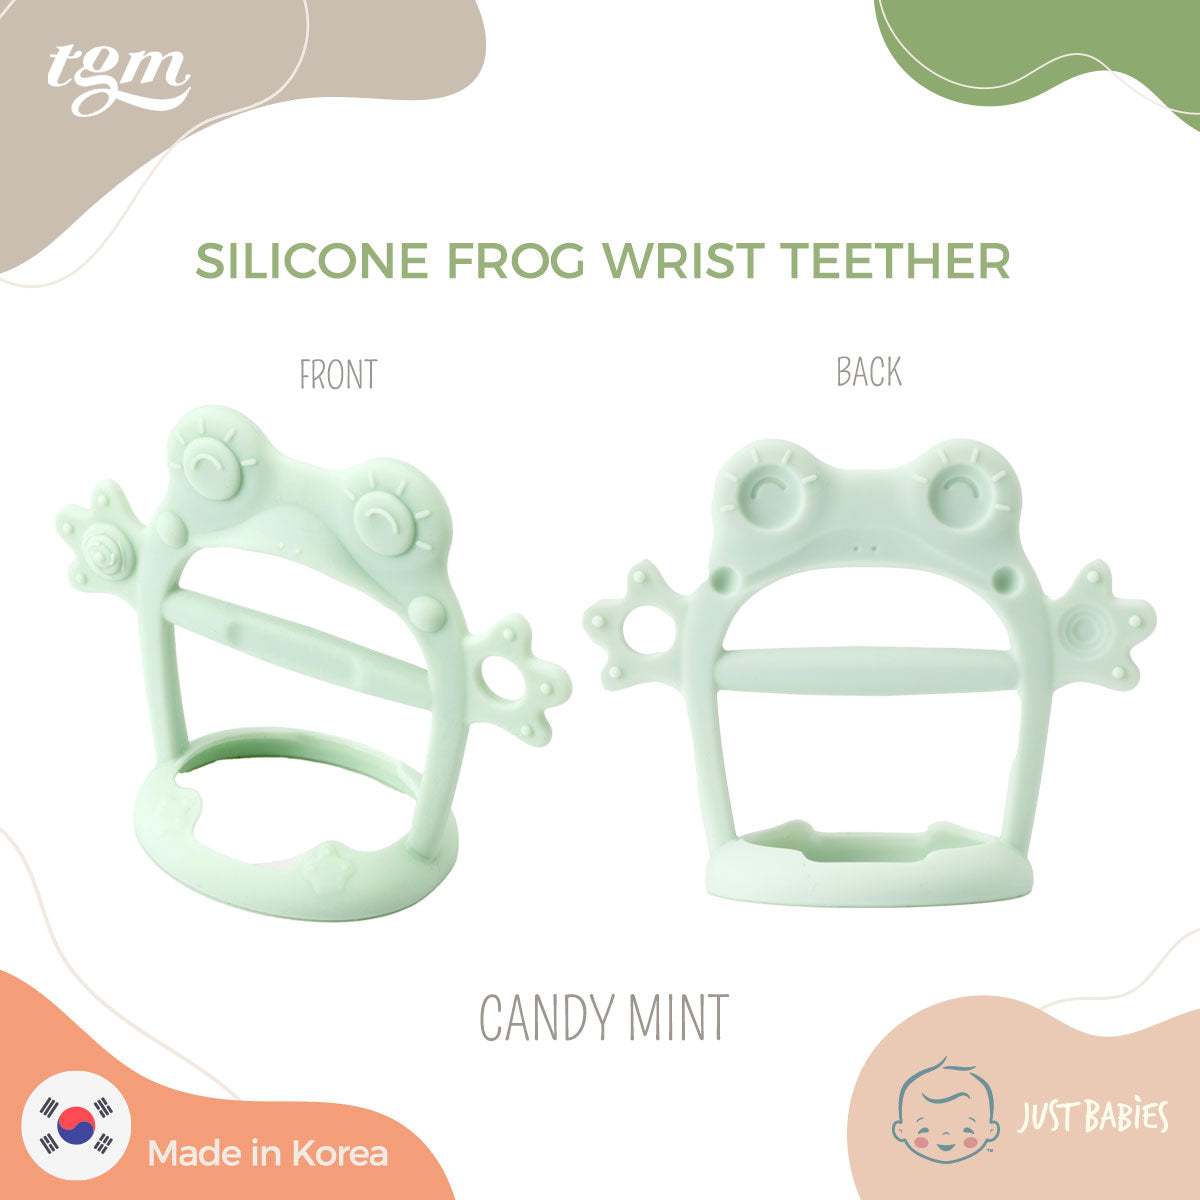 TGM Silicone Frog Wristband Teether with Case